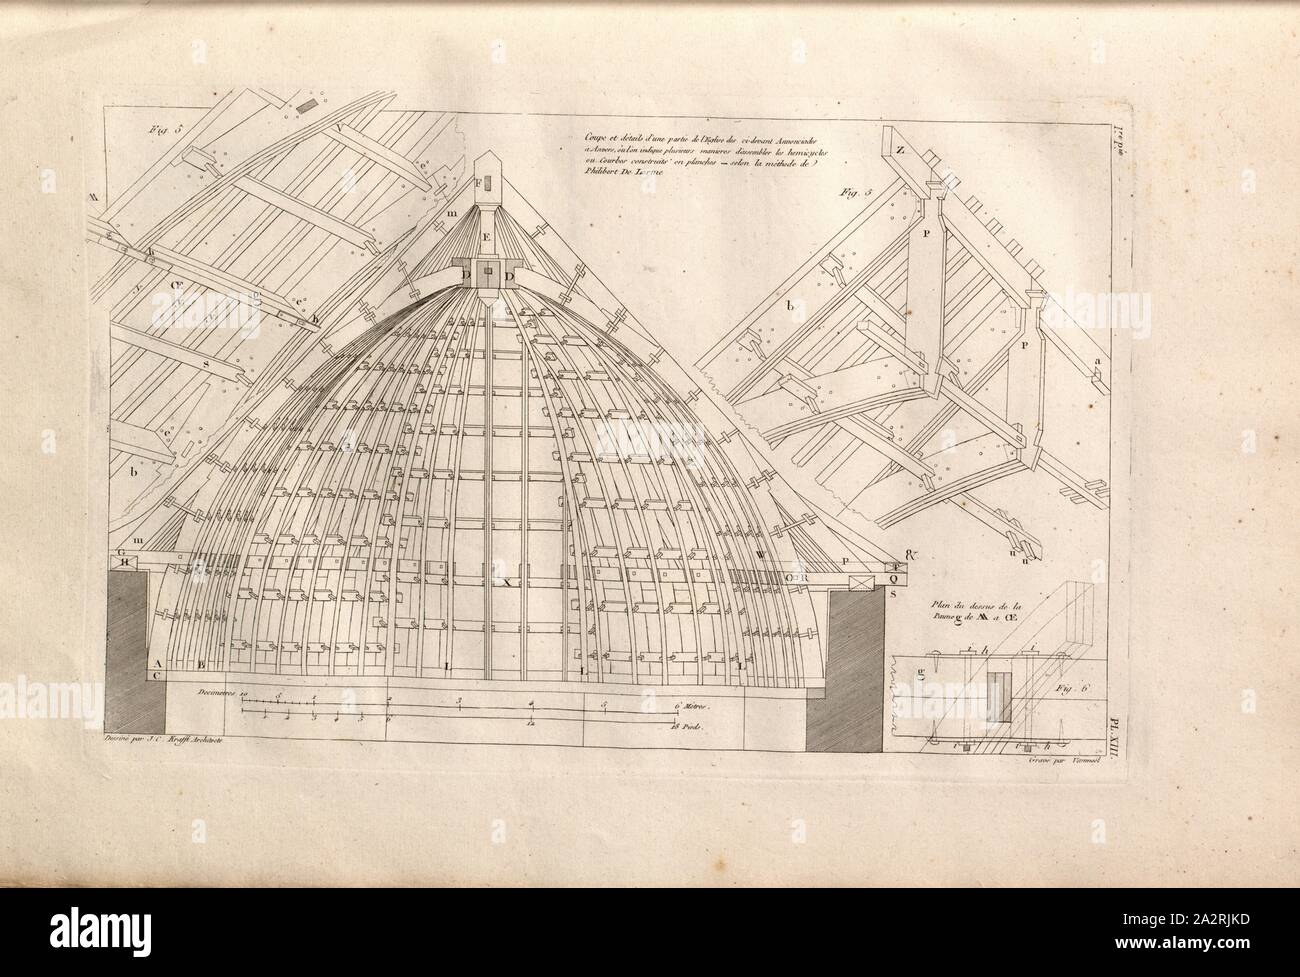 Cup and details of a part of the Church of the ci-devant Annonciades in  Antwerp, Construction drawing of an elevation of a roof truss of a 19th  century church in Antwerp, signed: